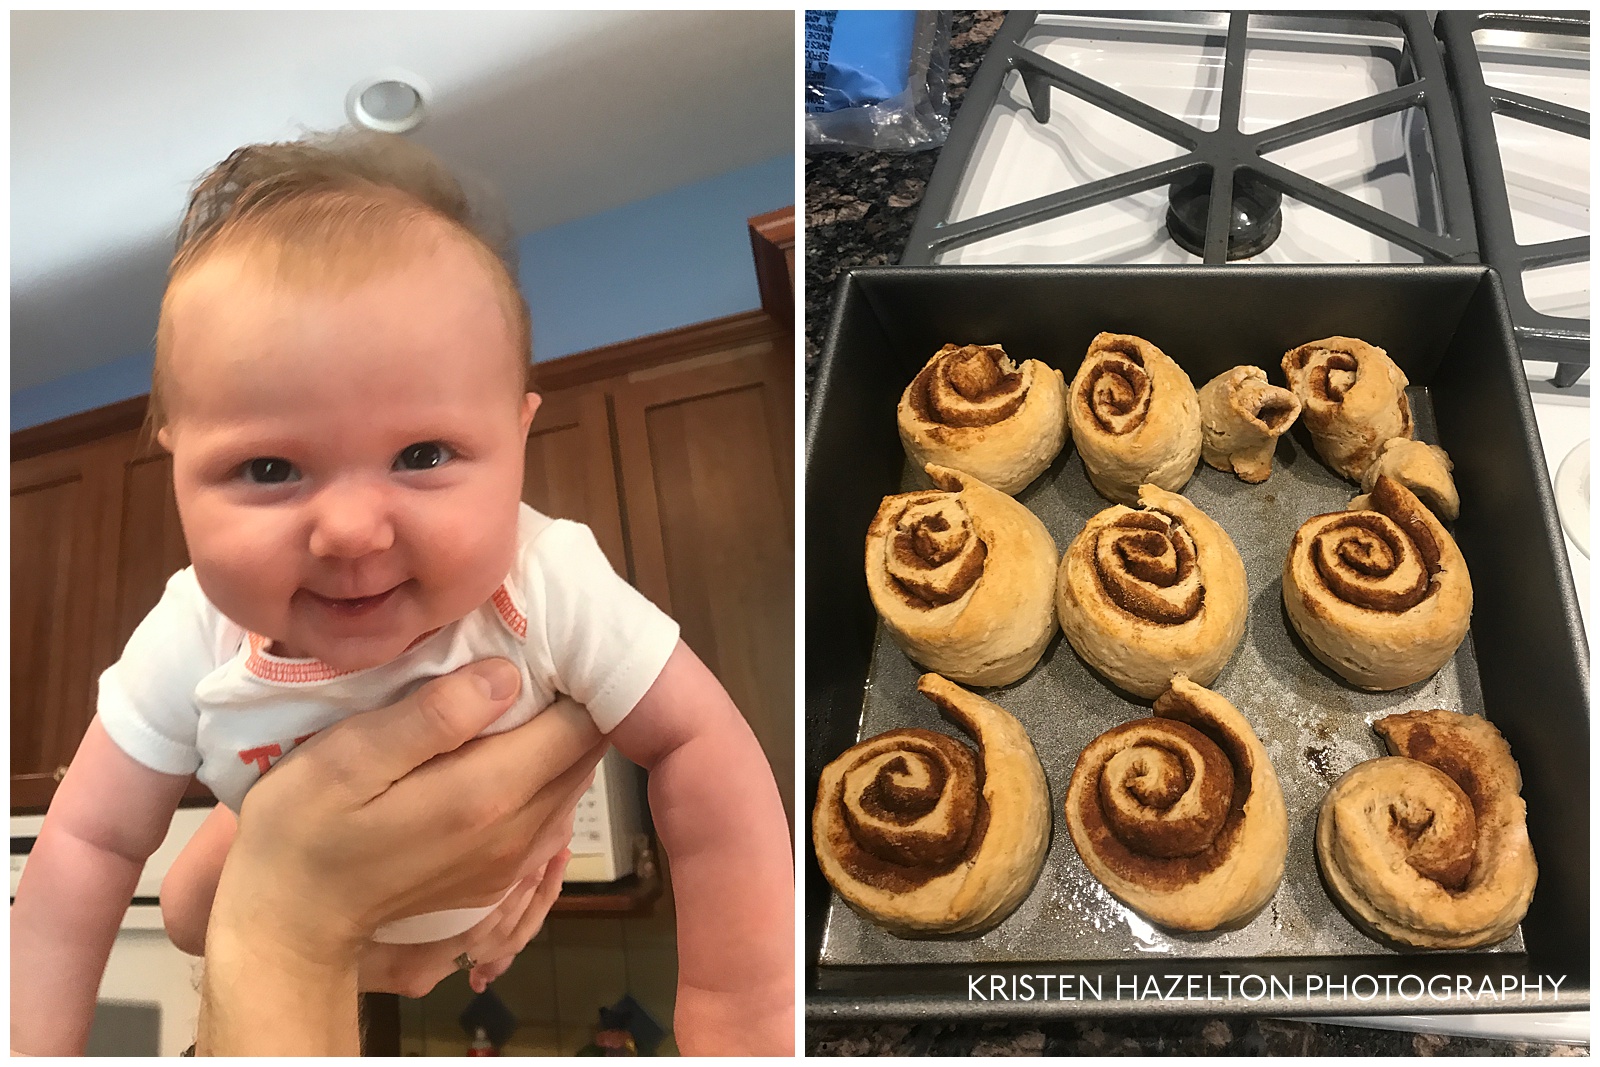 Baby being lifted up and a pan of cinnamon rolls